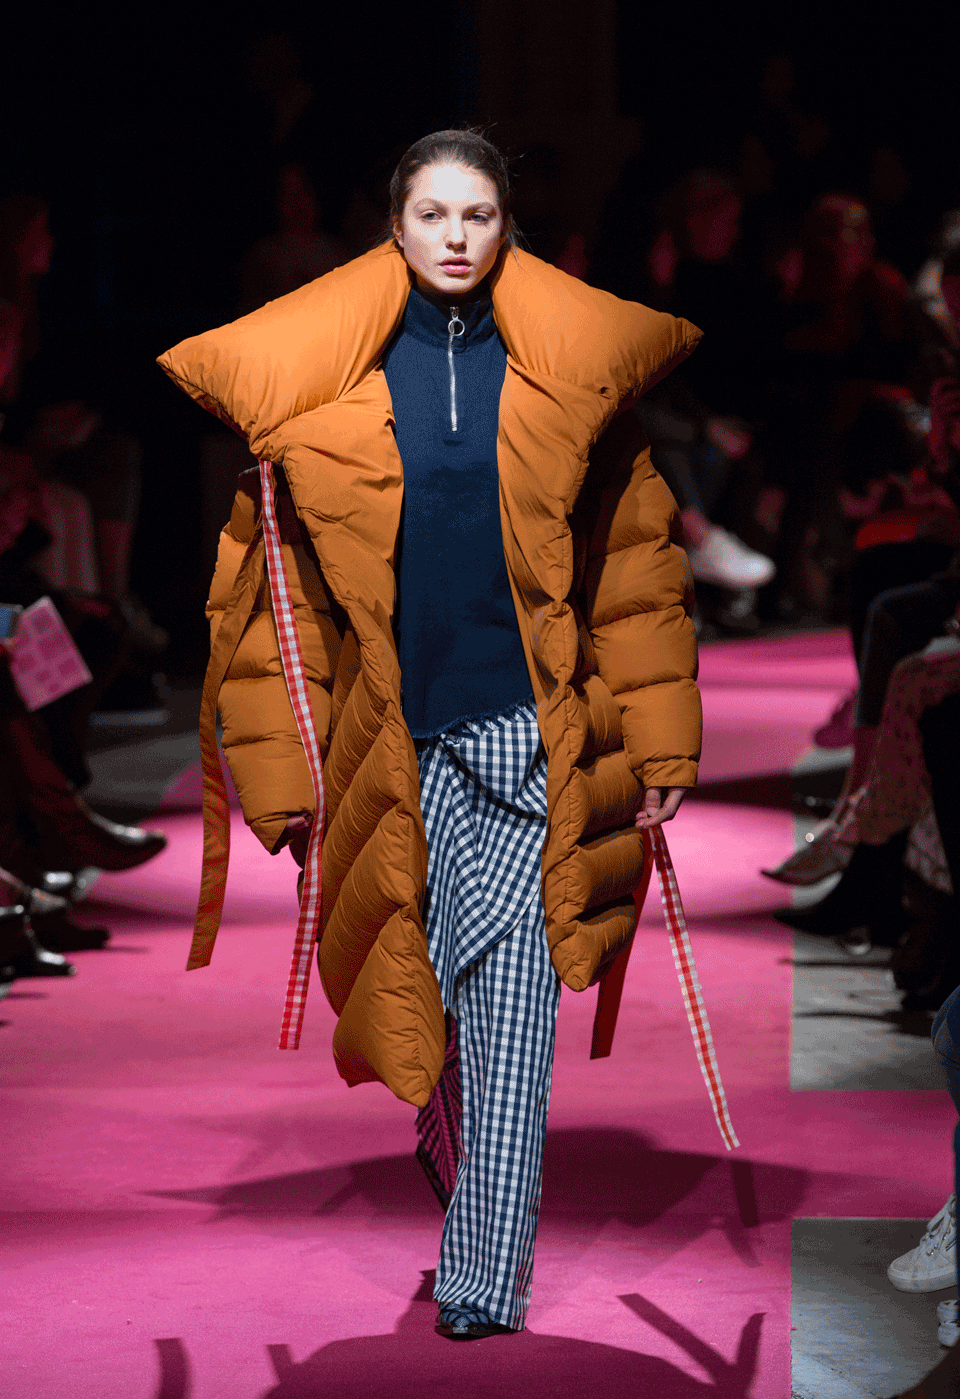 Best New Fashion Is Basically Wearing a Sleeping Bag as Clothing